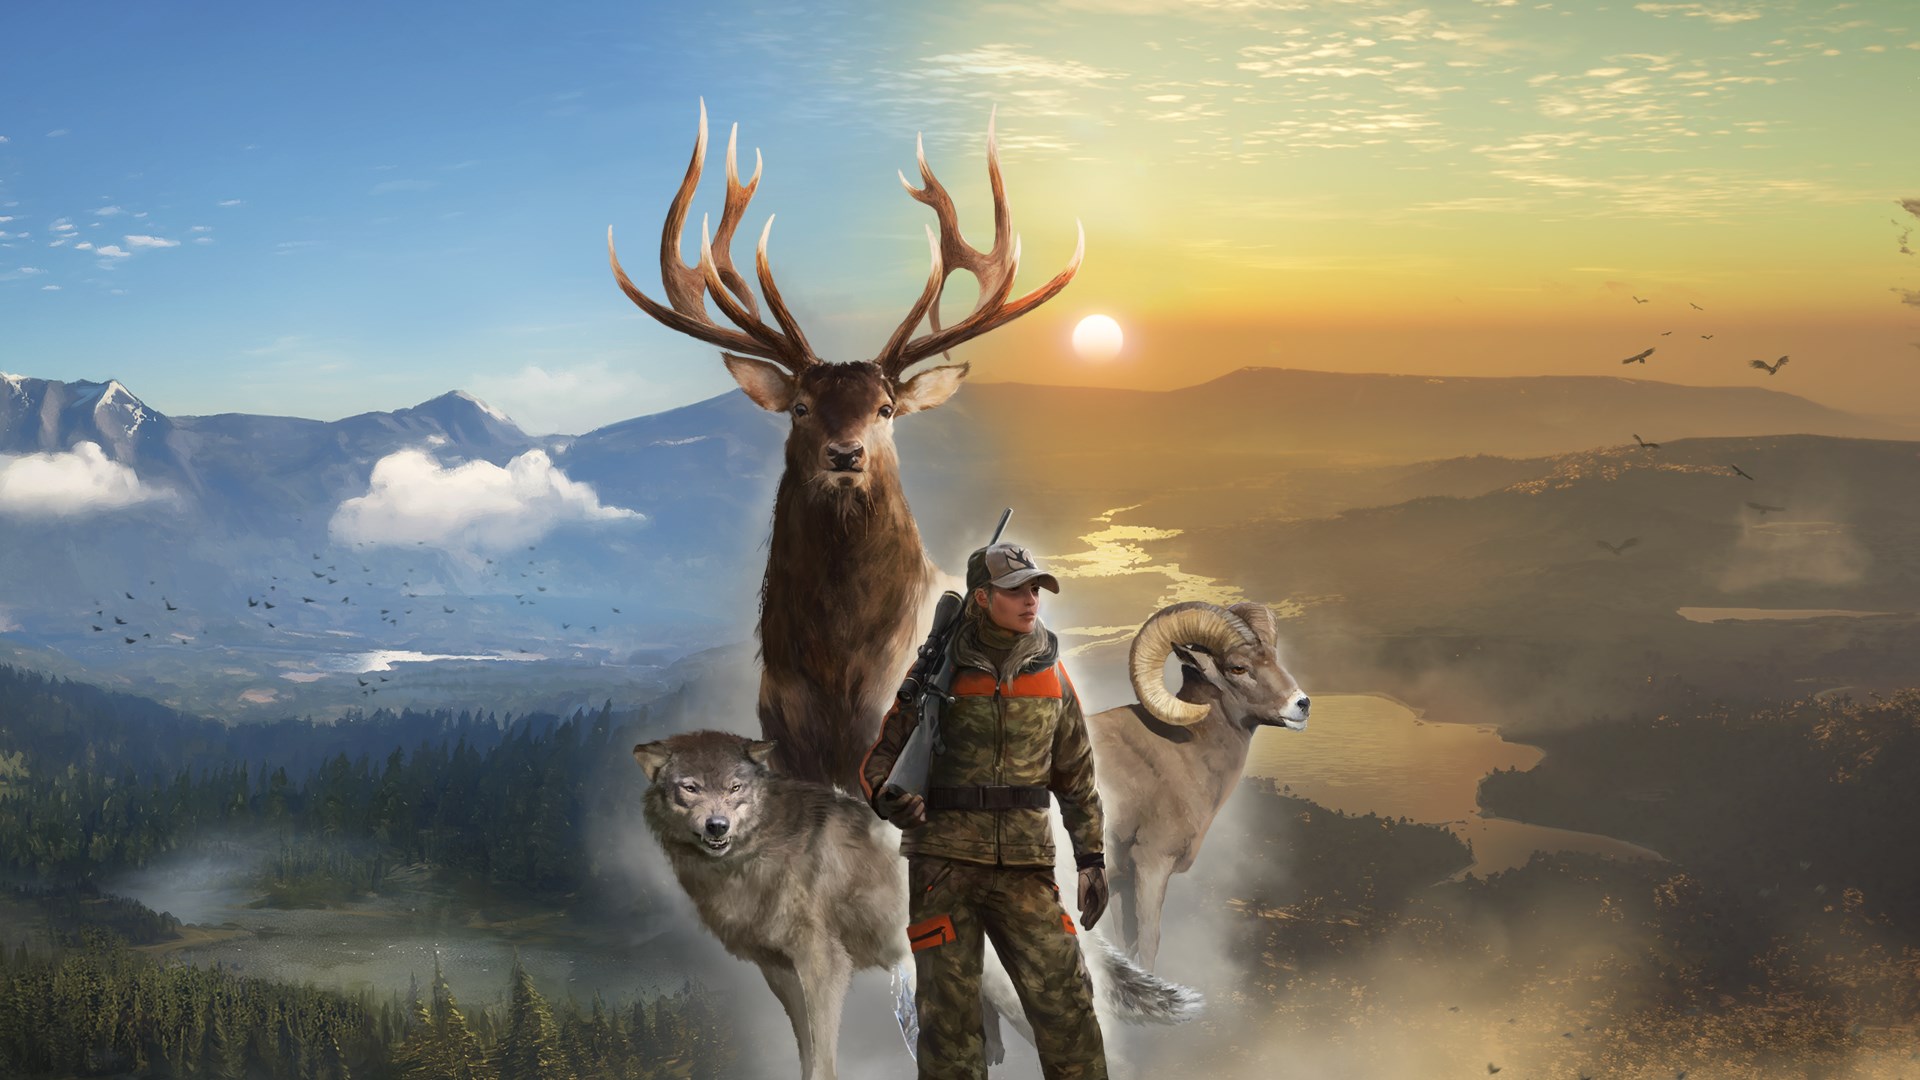 theHunter: Call of The Wild Wallpapers